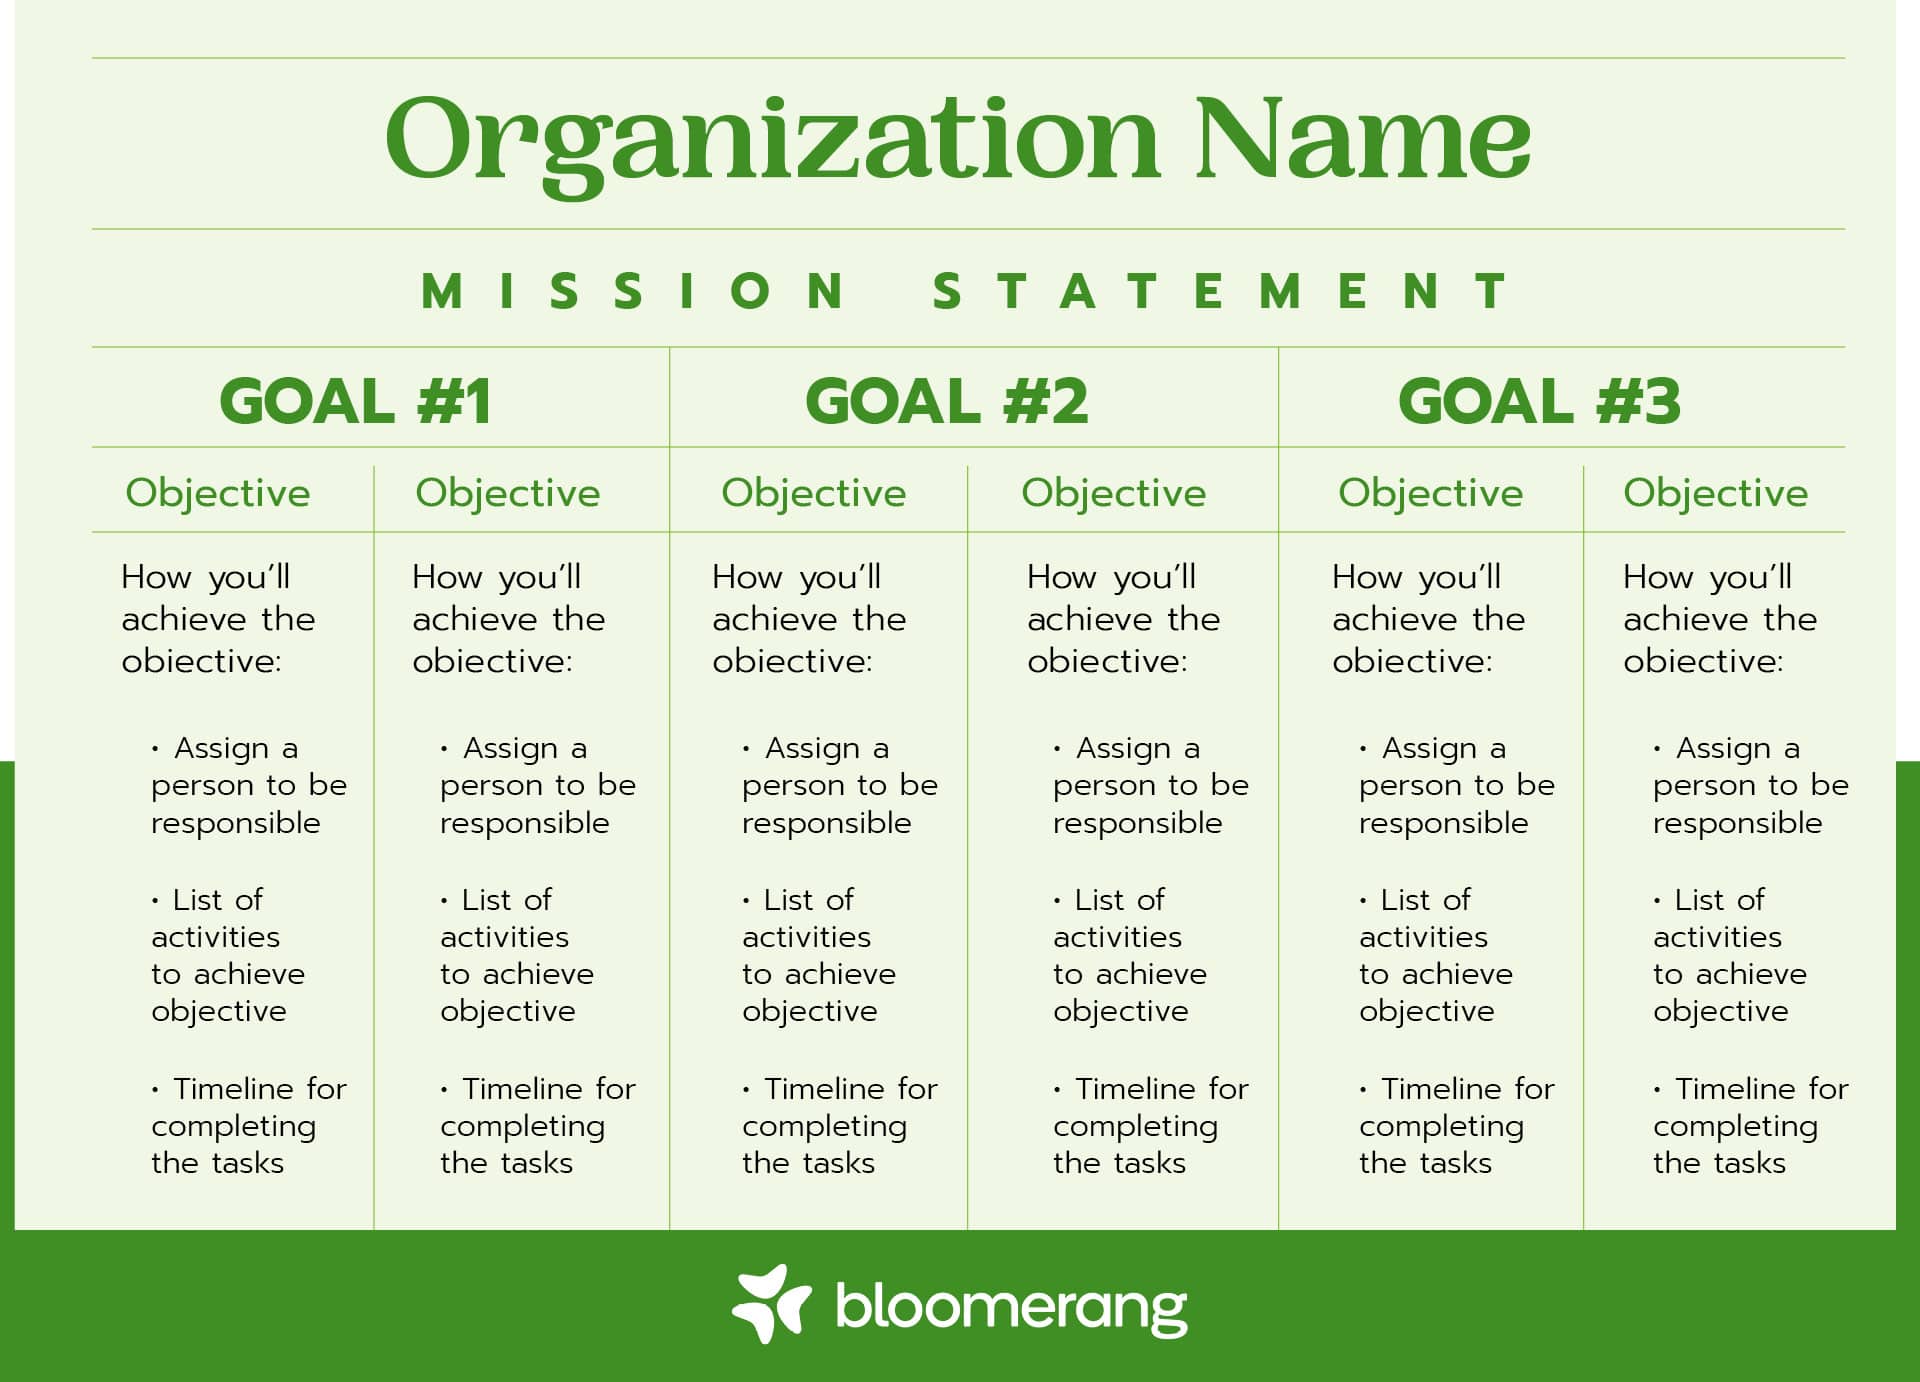 This image shows a nonprofit strategic planning template (described further in the text below).